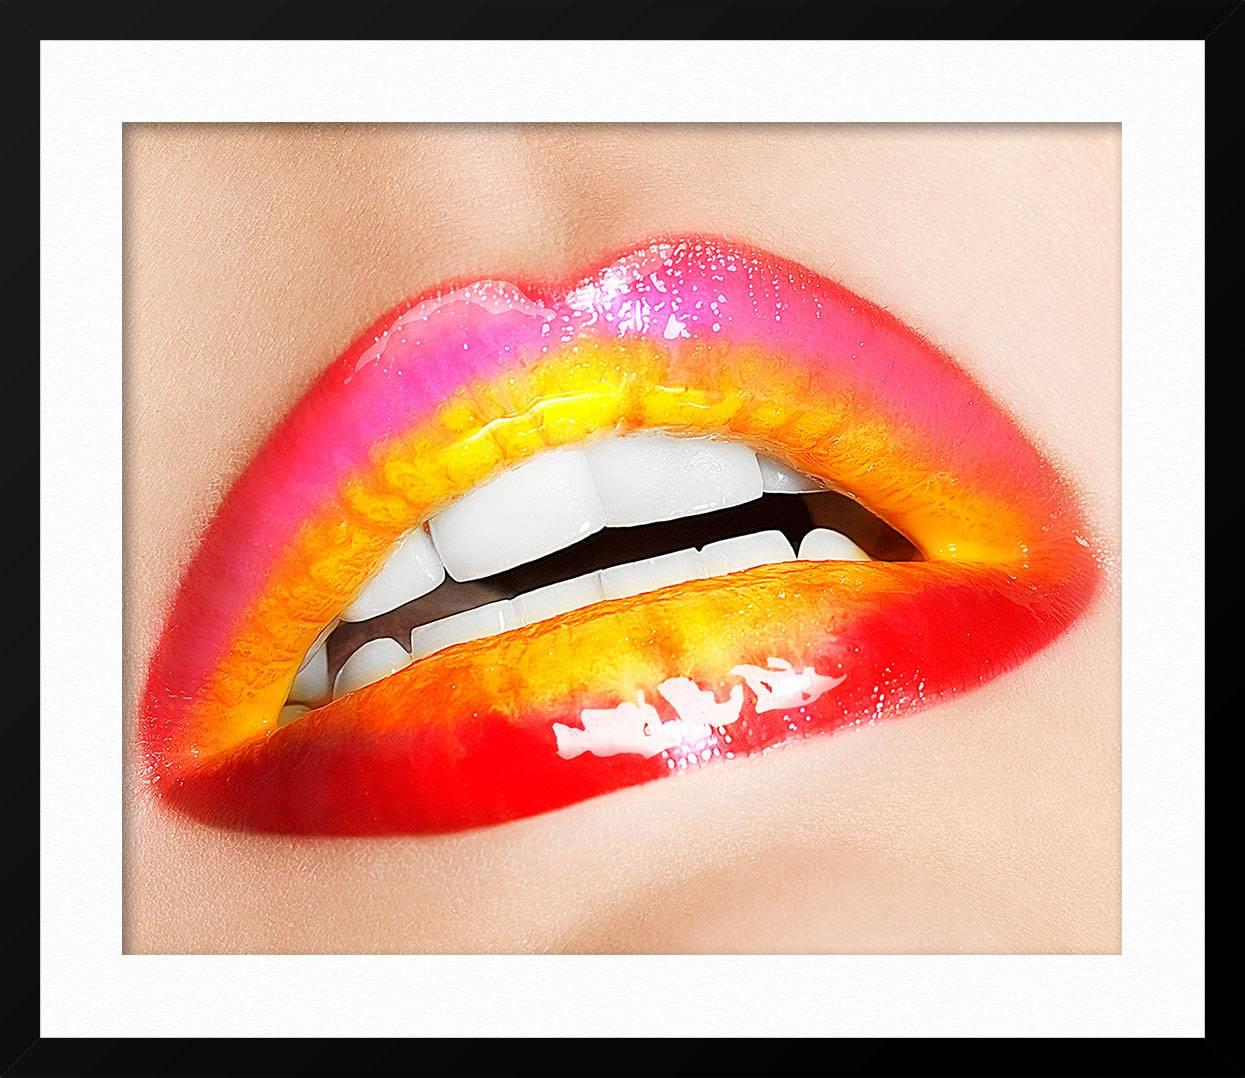 ABOUT THIS PIECE: Our gallery features a selection of works from Herve's expansive collection of Lips photographs. A Fashion & Beauty photographer, Hervé meticulously shows the stunning elegance of woman through the beauty of the mouth.

ABOUT THIS